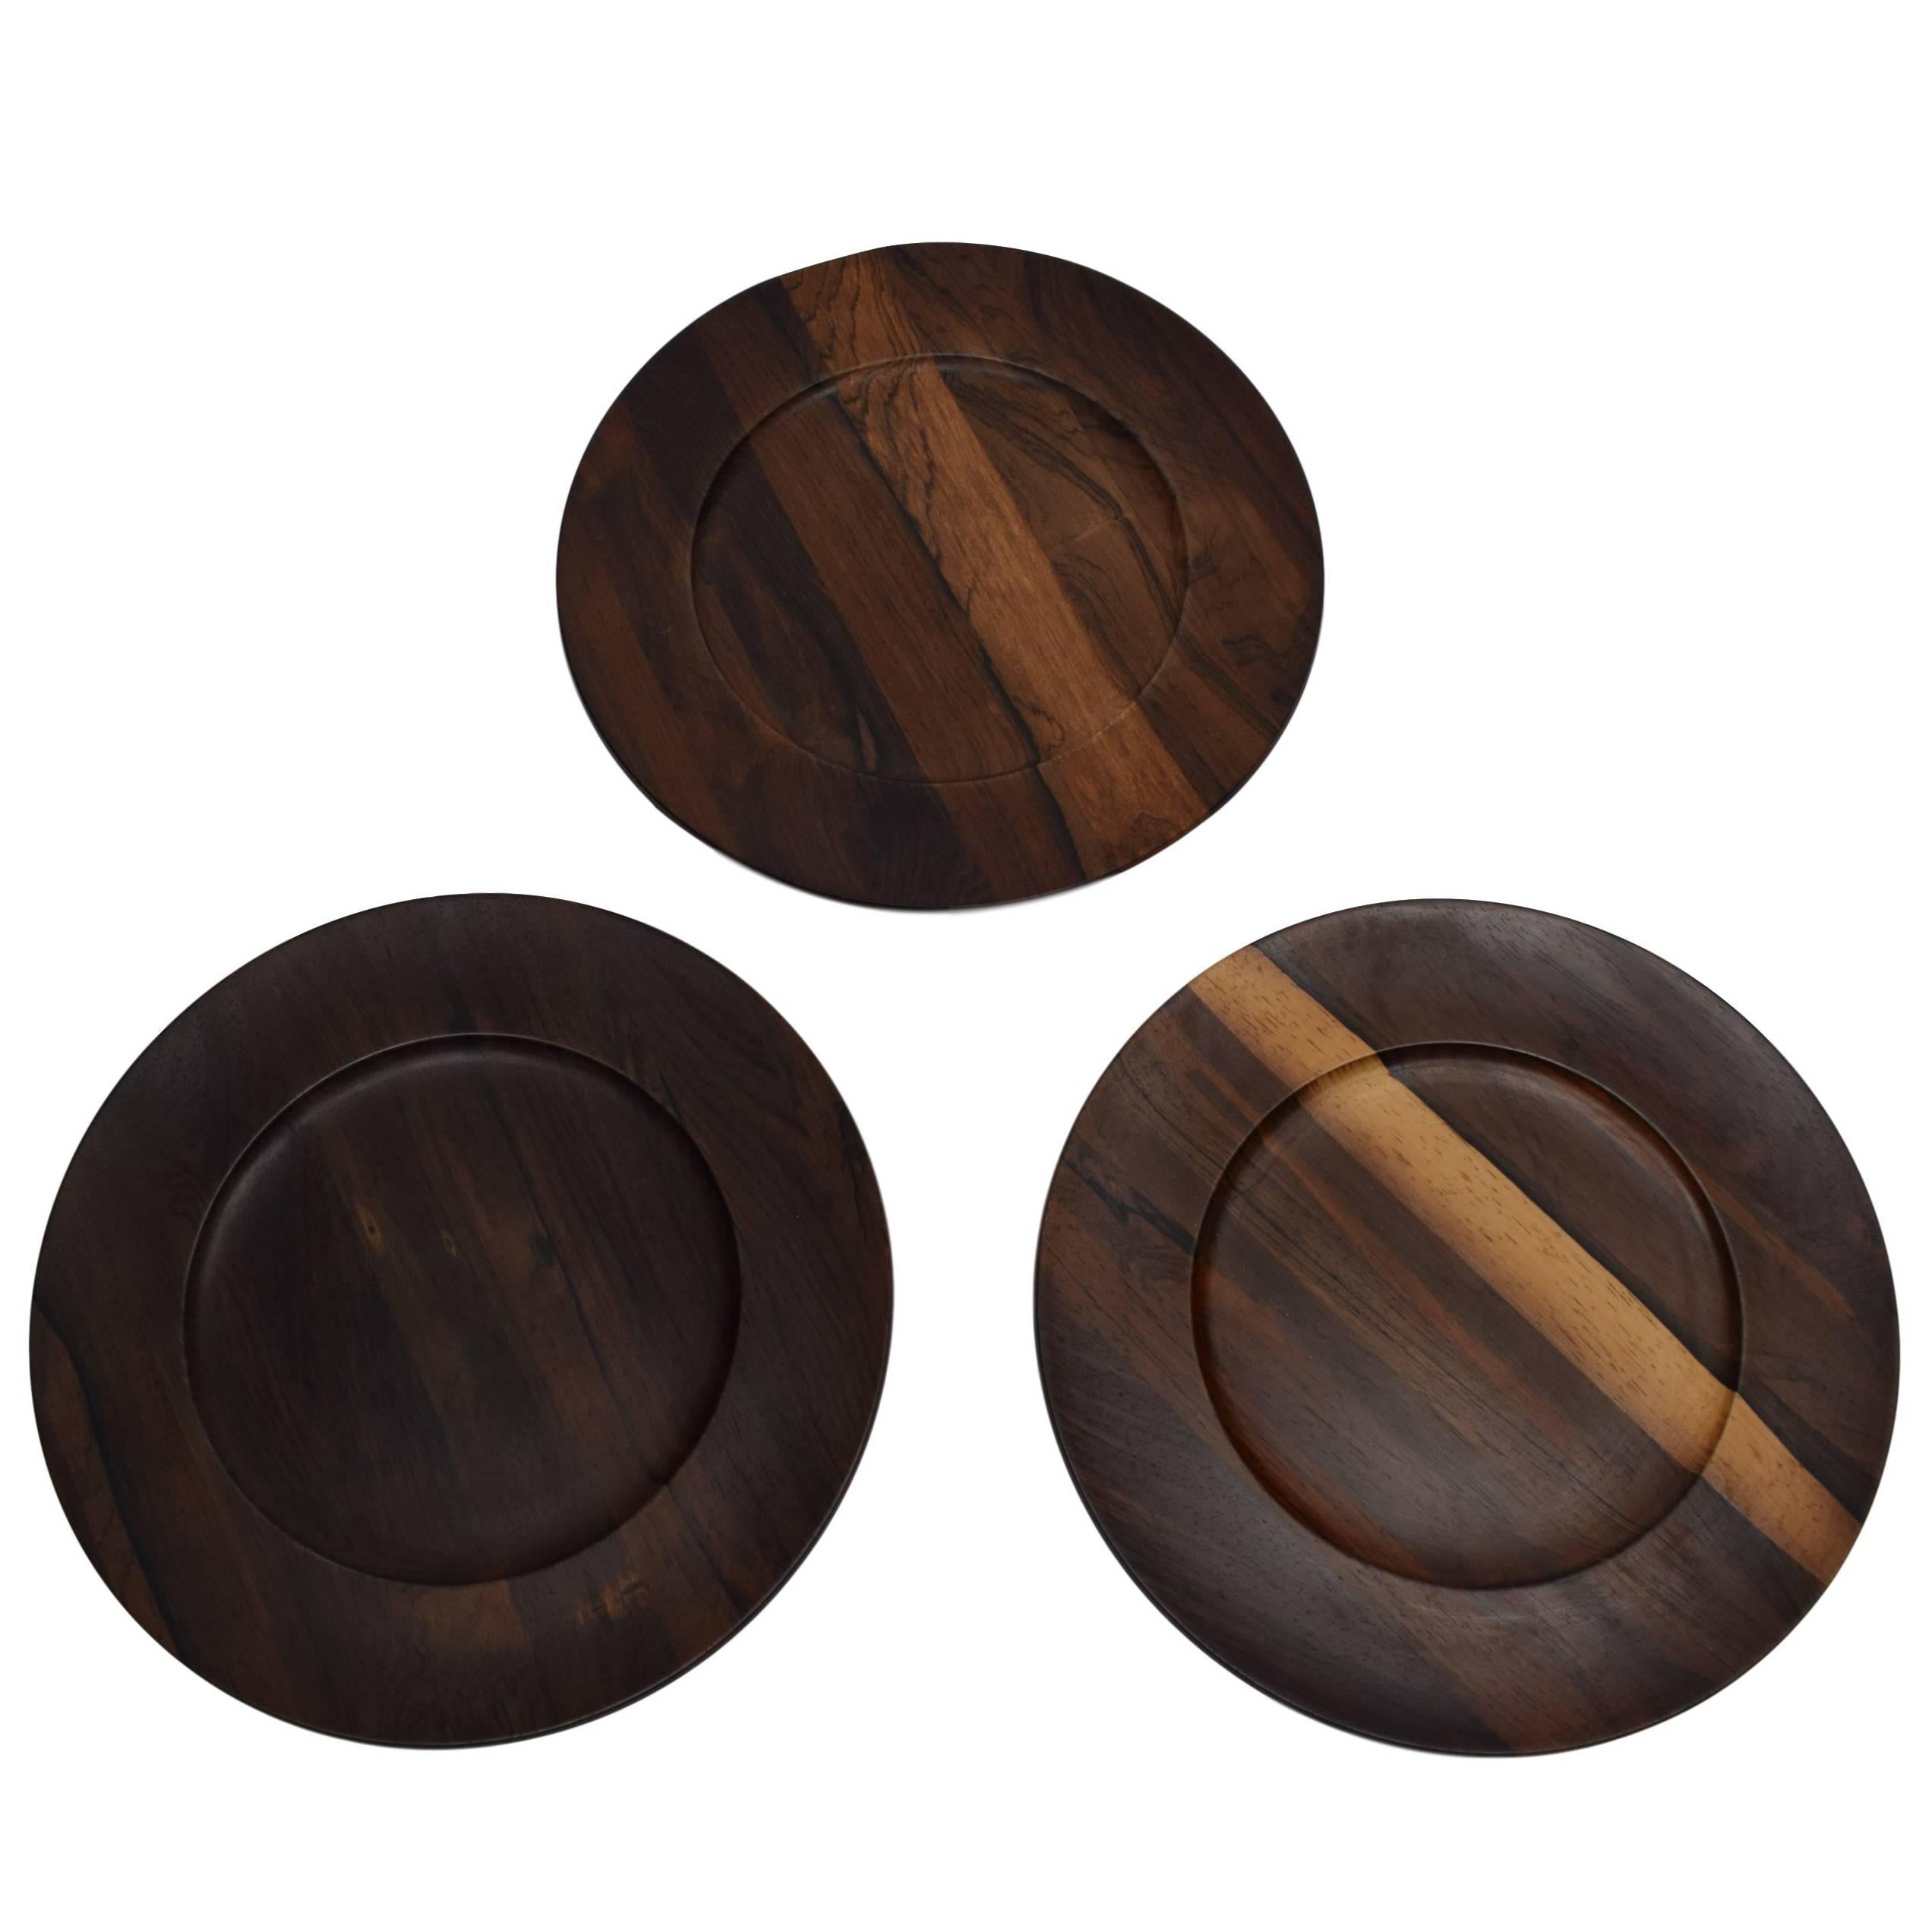 Danish Midcentury, Jens H. Quistgaard, Three Cover Plates, Rosewood, Kronjyden For Sale